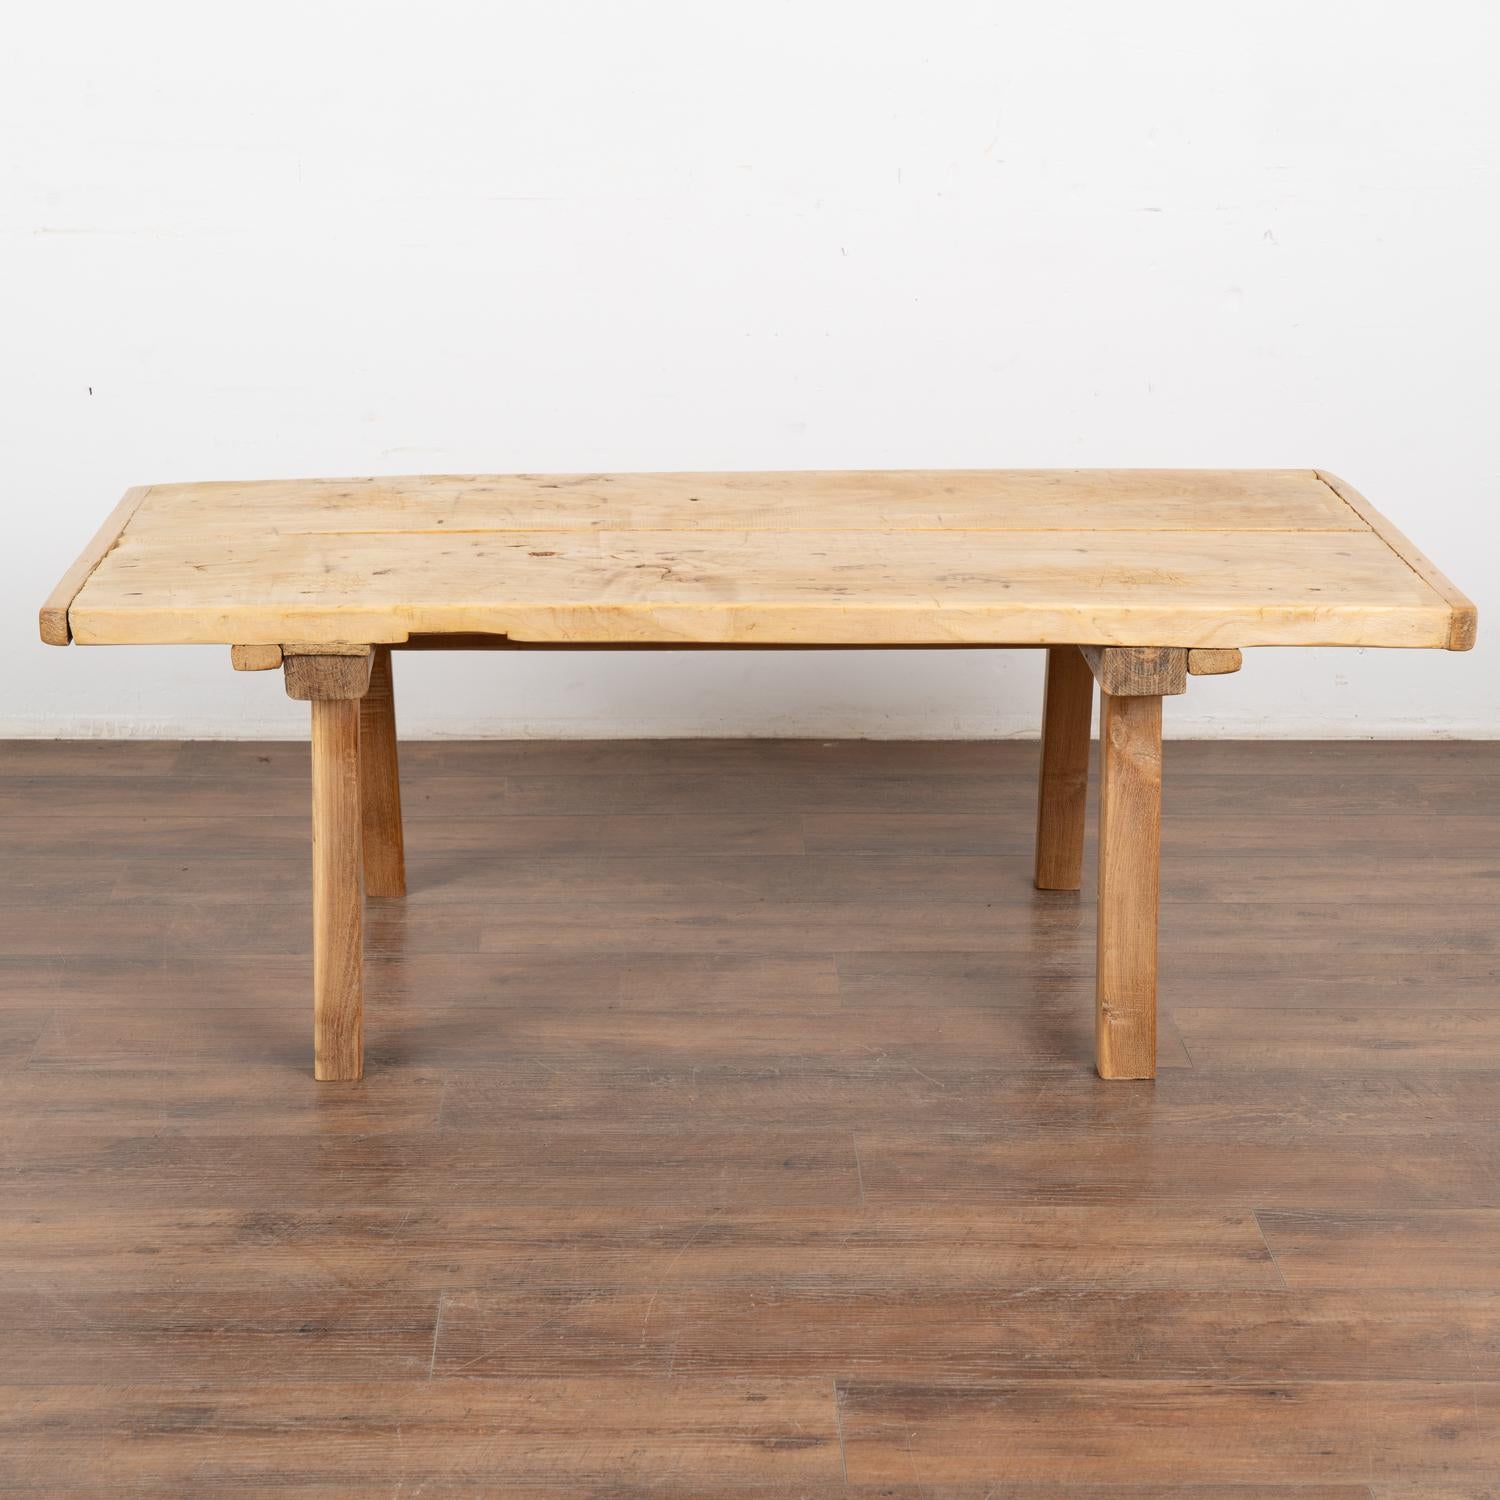 Hungarian Rustic Coffee Table from Old Work Table, Hungary circa 1900 For Sale